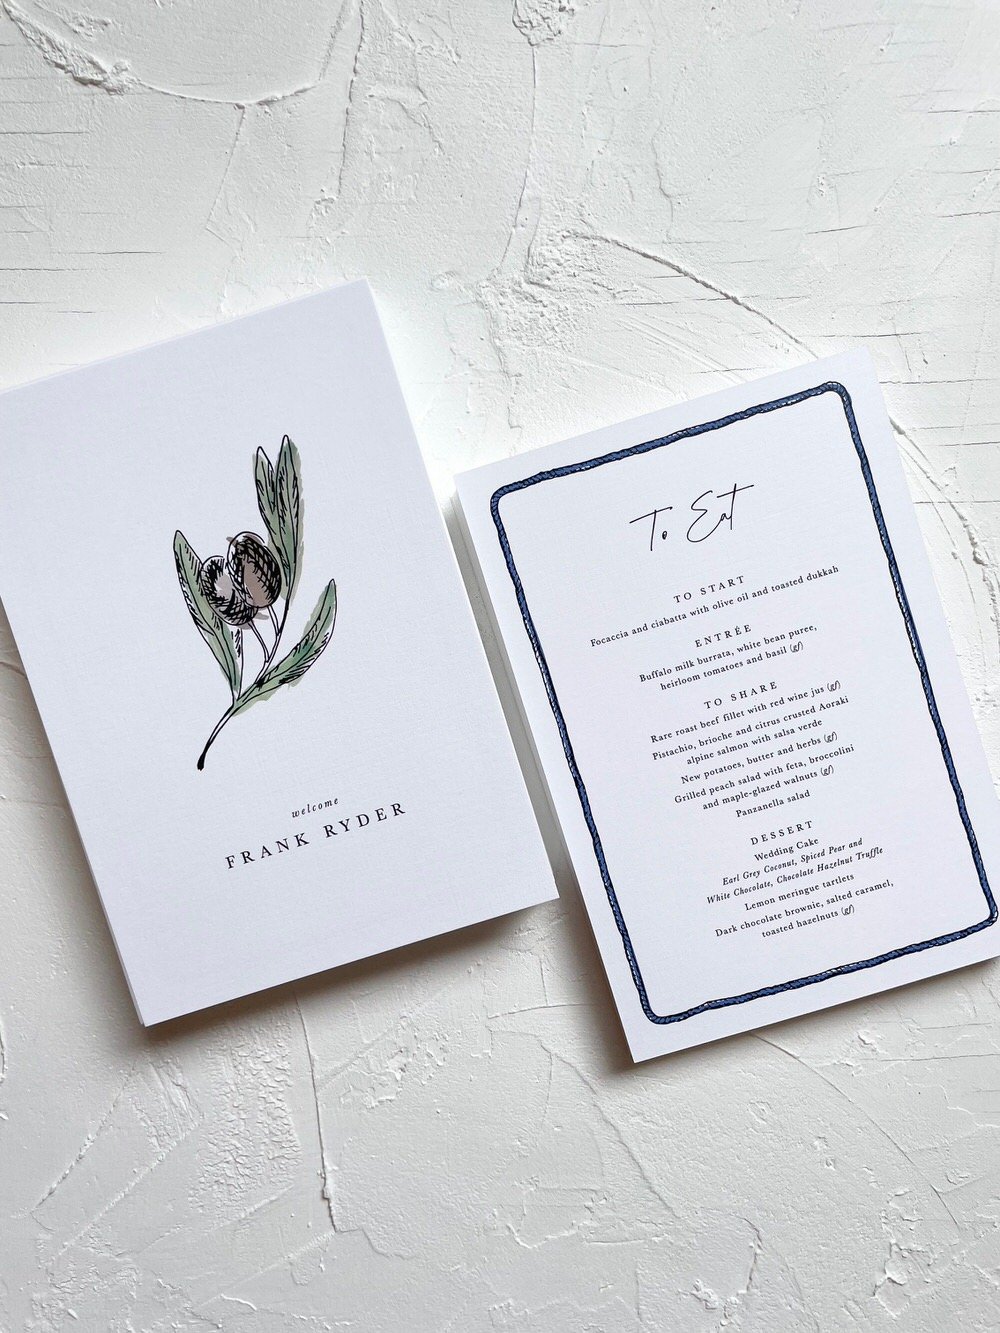 Just My Type Wedding Invitation Stationery NZ Wedding Menu Place Name Table Number7212.jpg